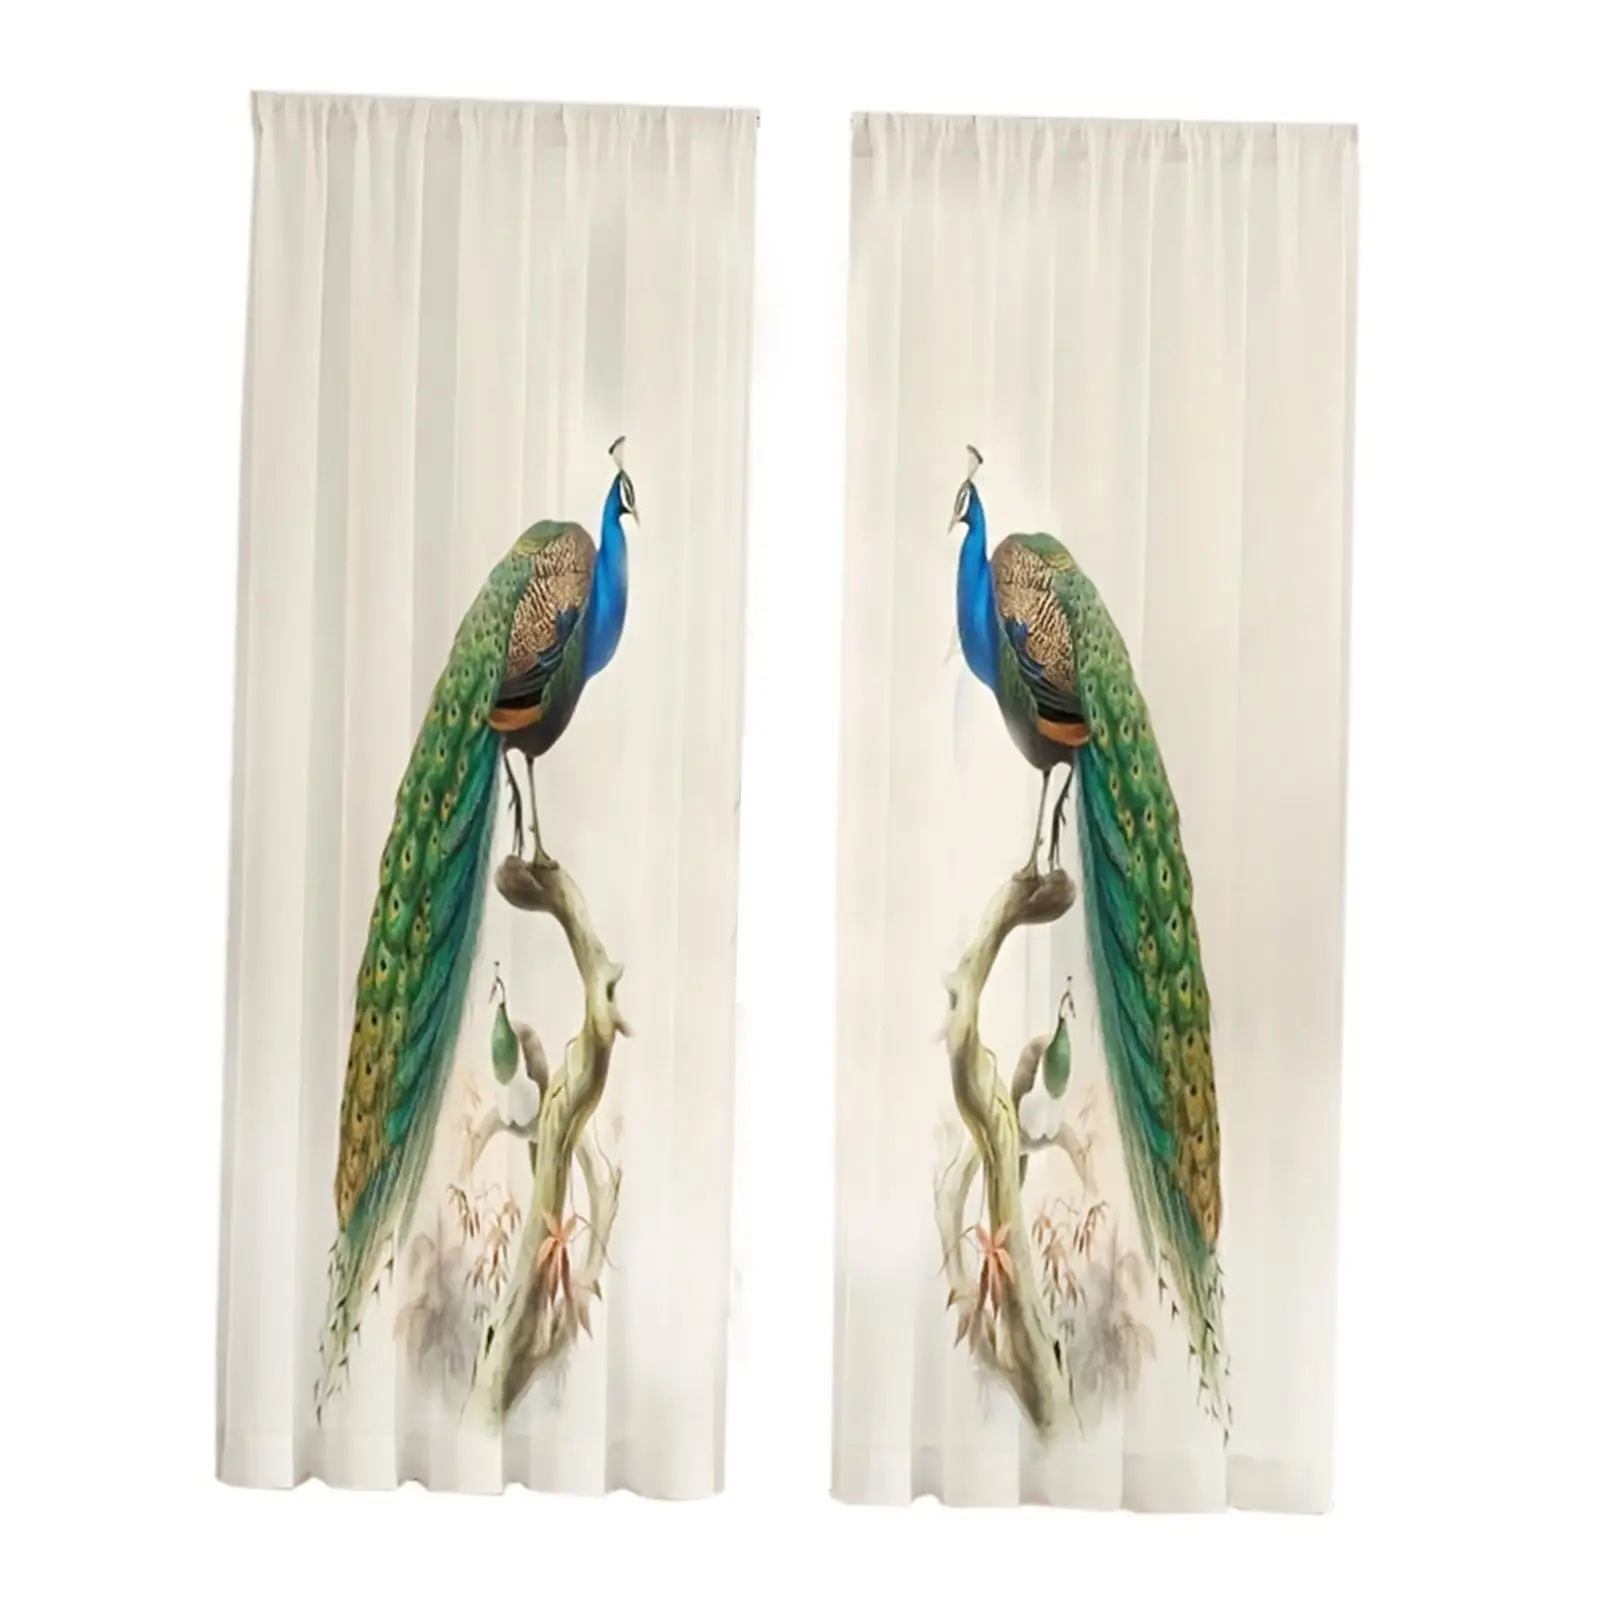 Printed Sheer Curtains Window Curtains for Home Decoration Yard Bedroom